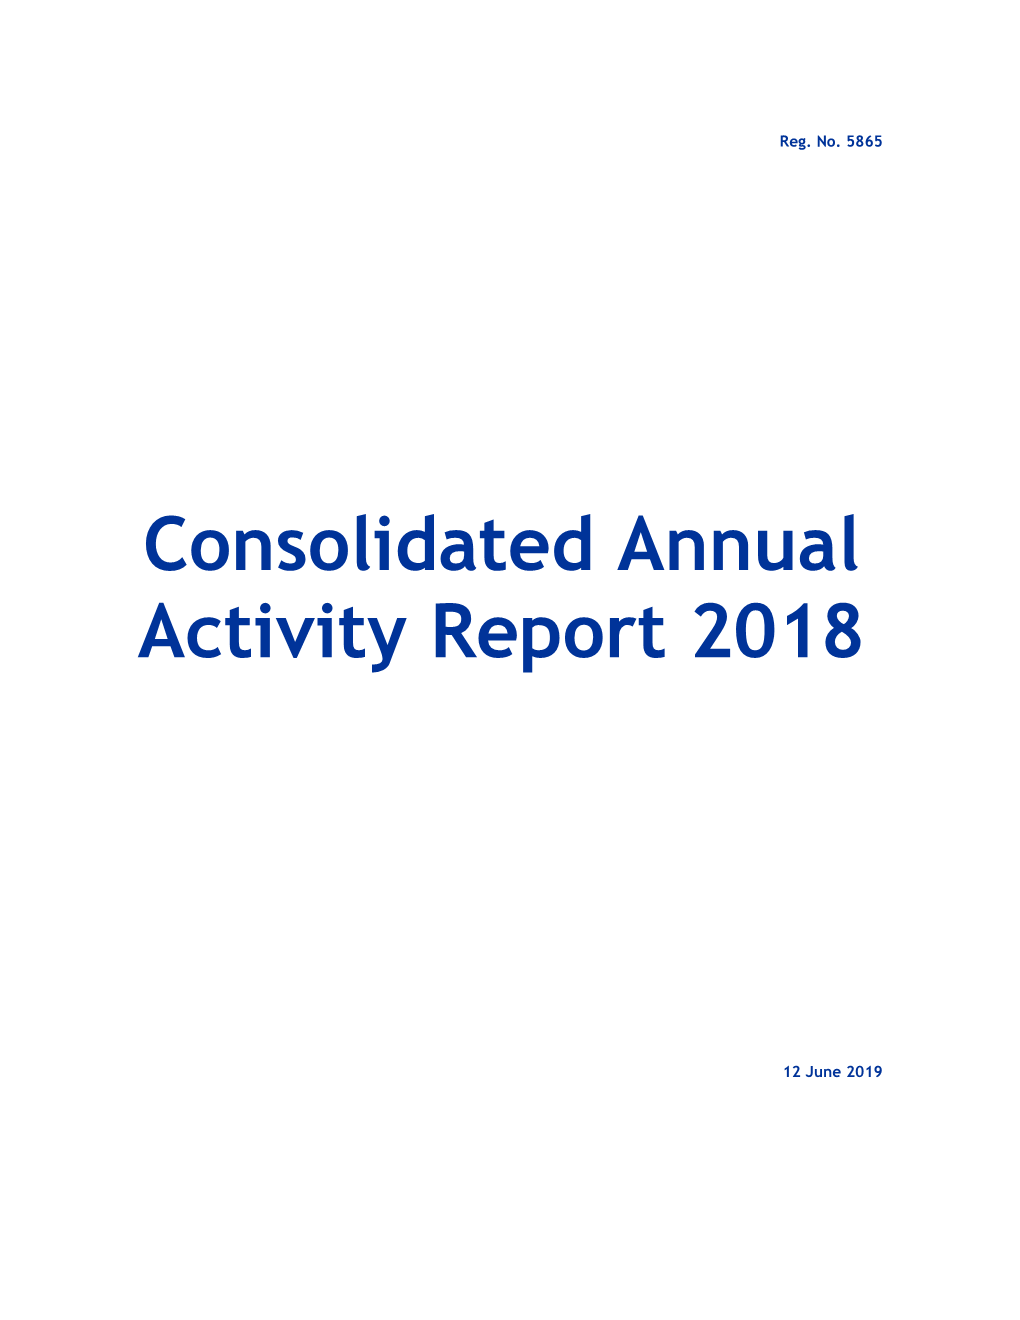 Consolidated Annual Activity Report 2018